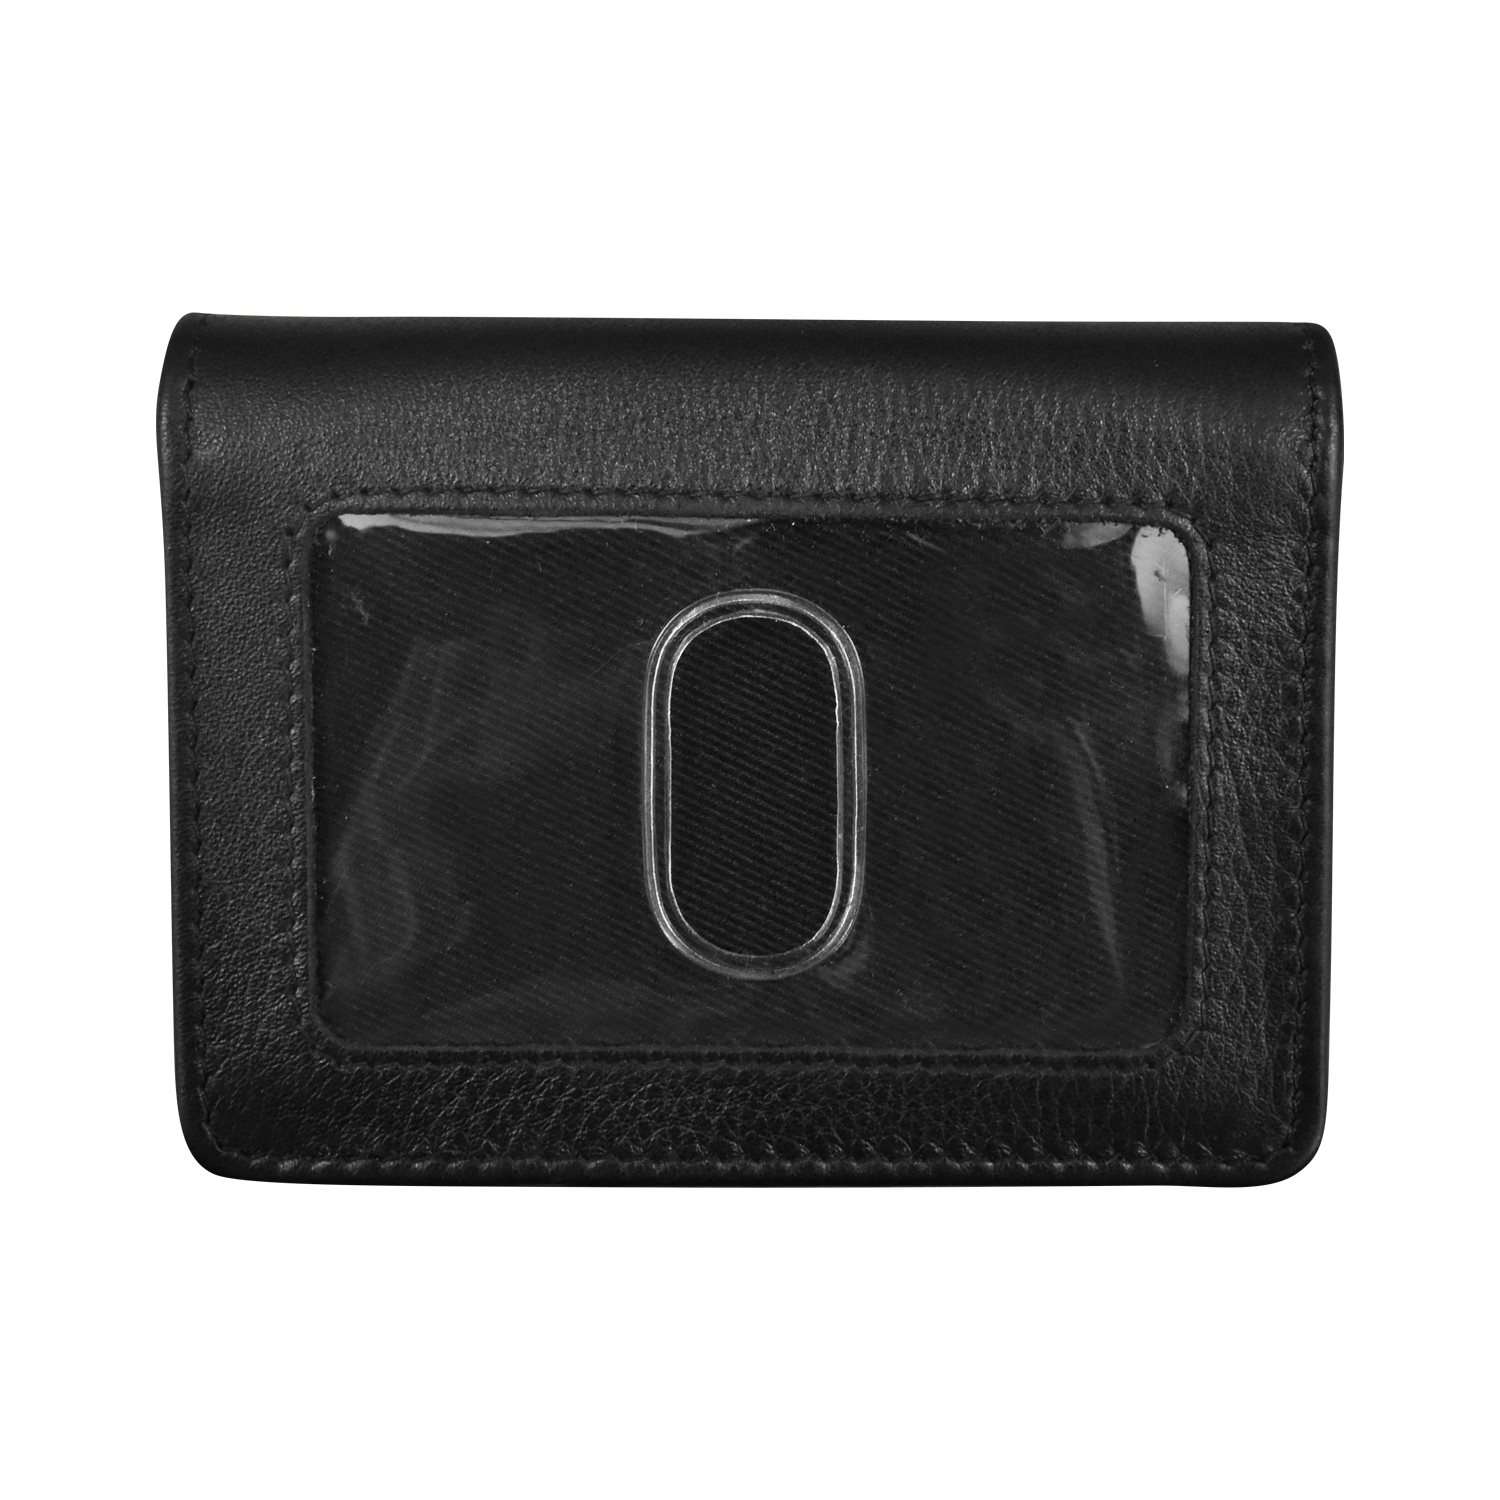 Two Sided Bussiness Card Case